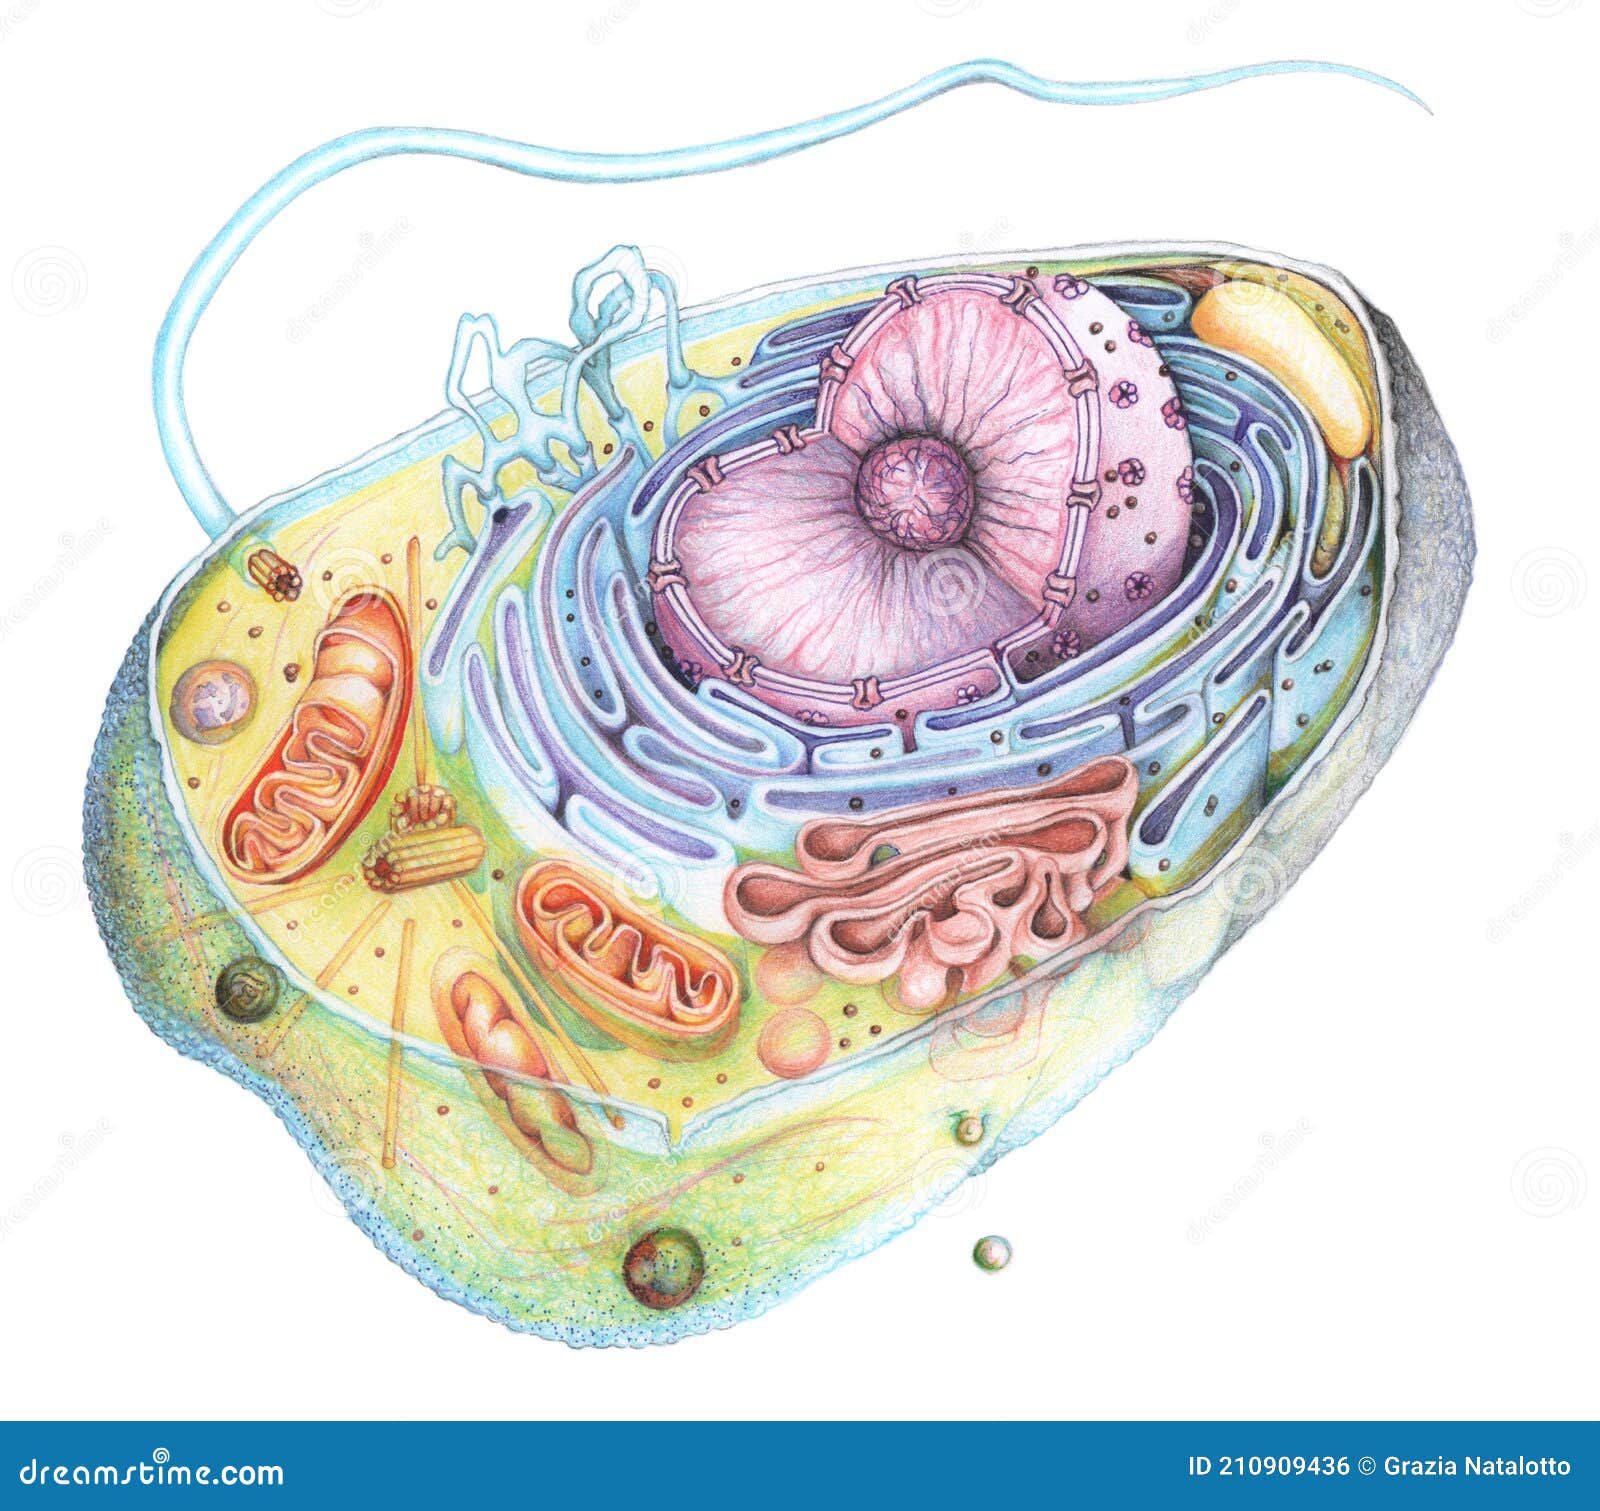 eukaryote cell section drawing